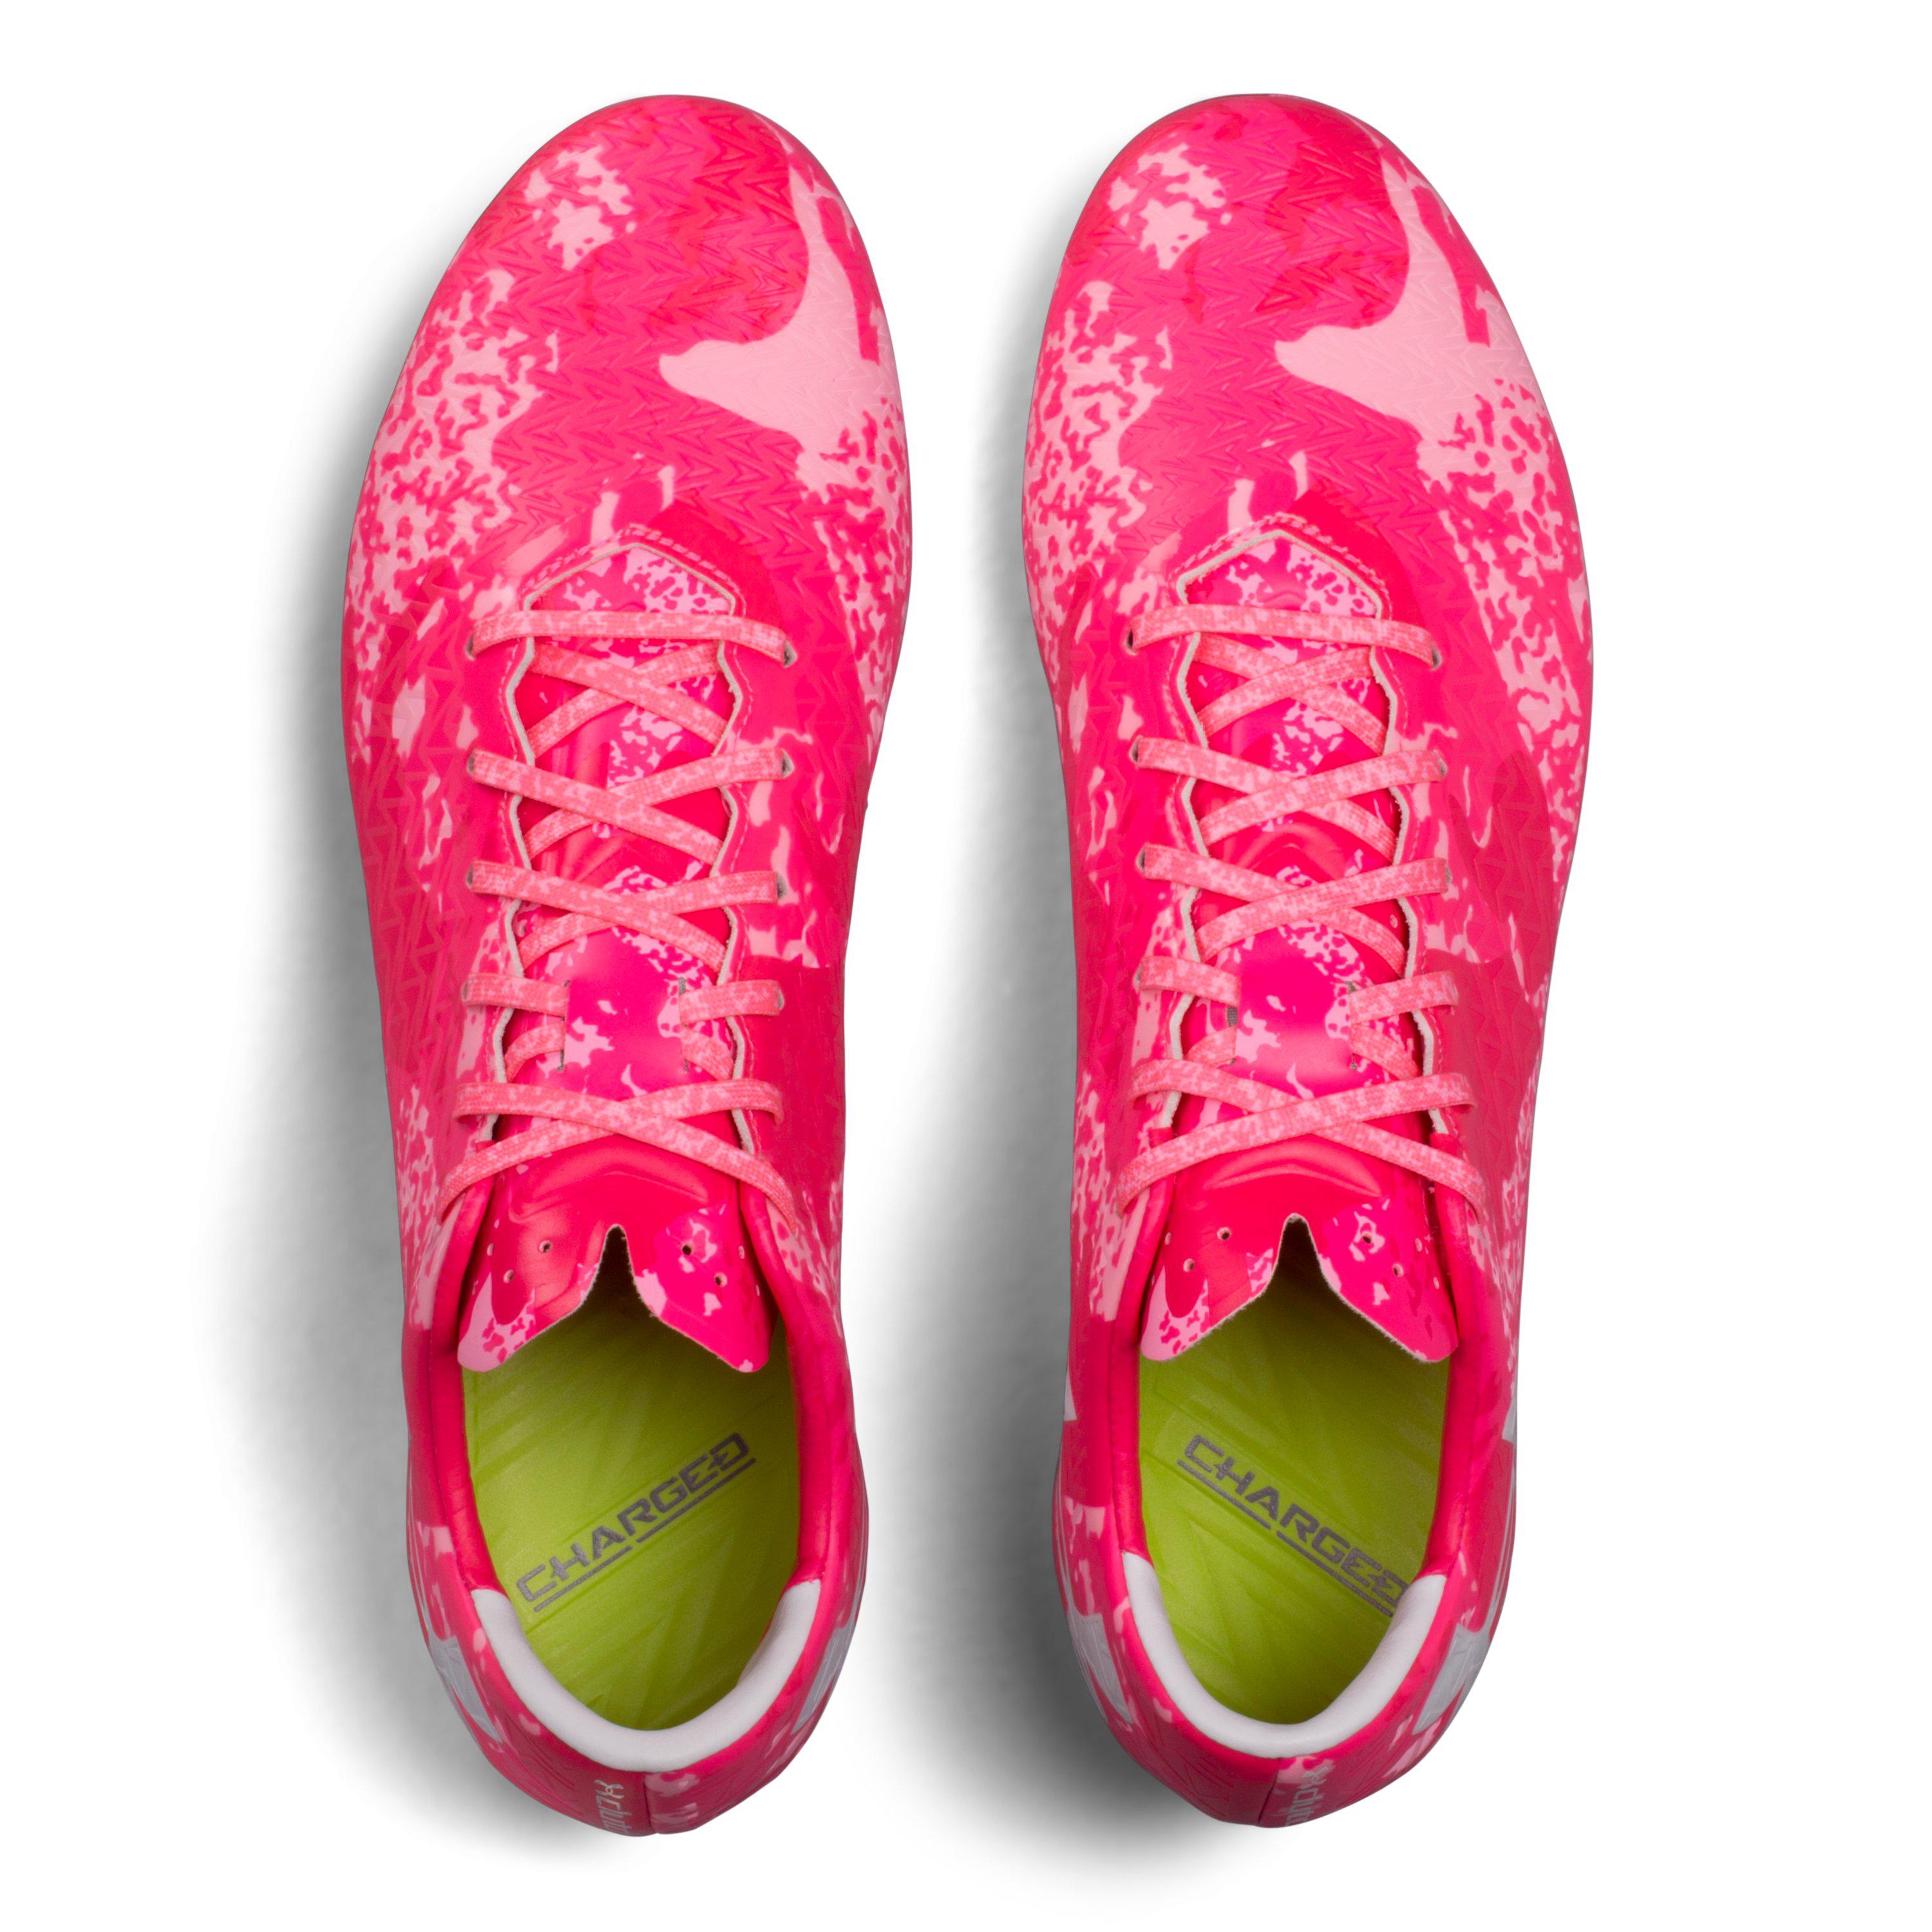 Under Armour Men's Ua Clutchfit® Force 3.0 Firm Ground— Limited Edition  Soccer Cleats in Pink for Men | Lyst